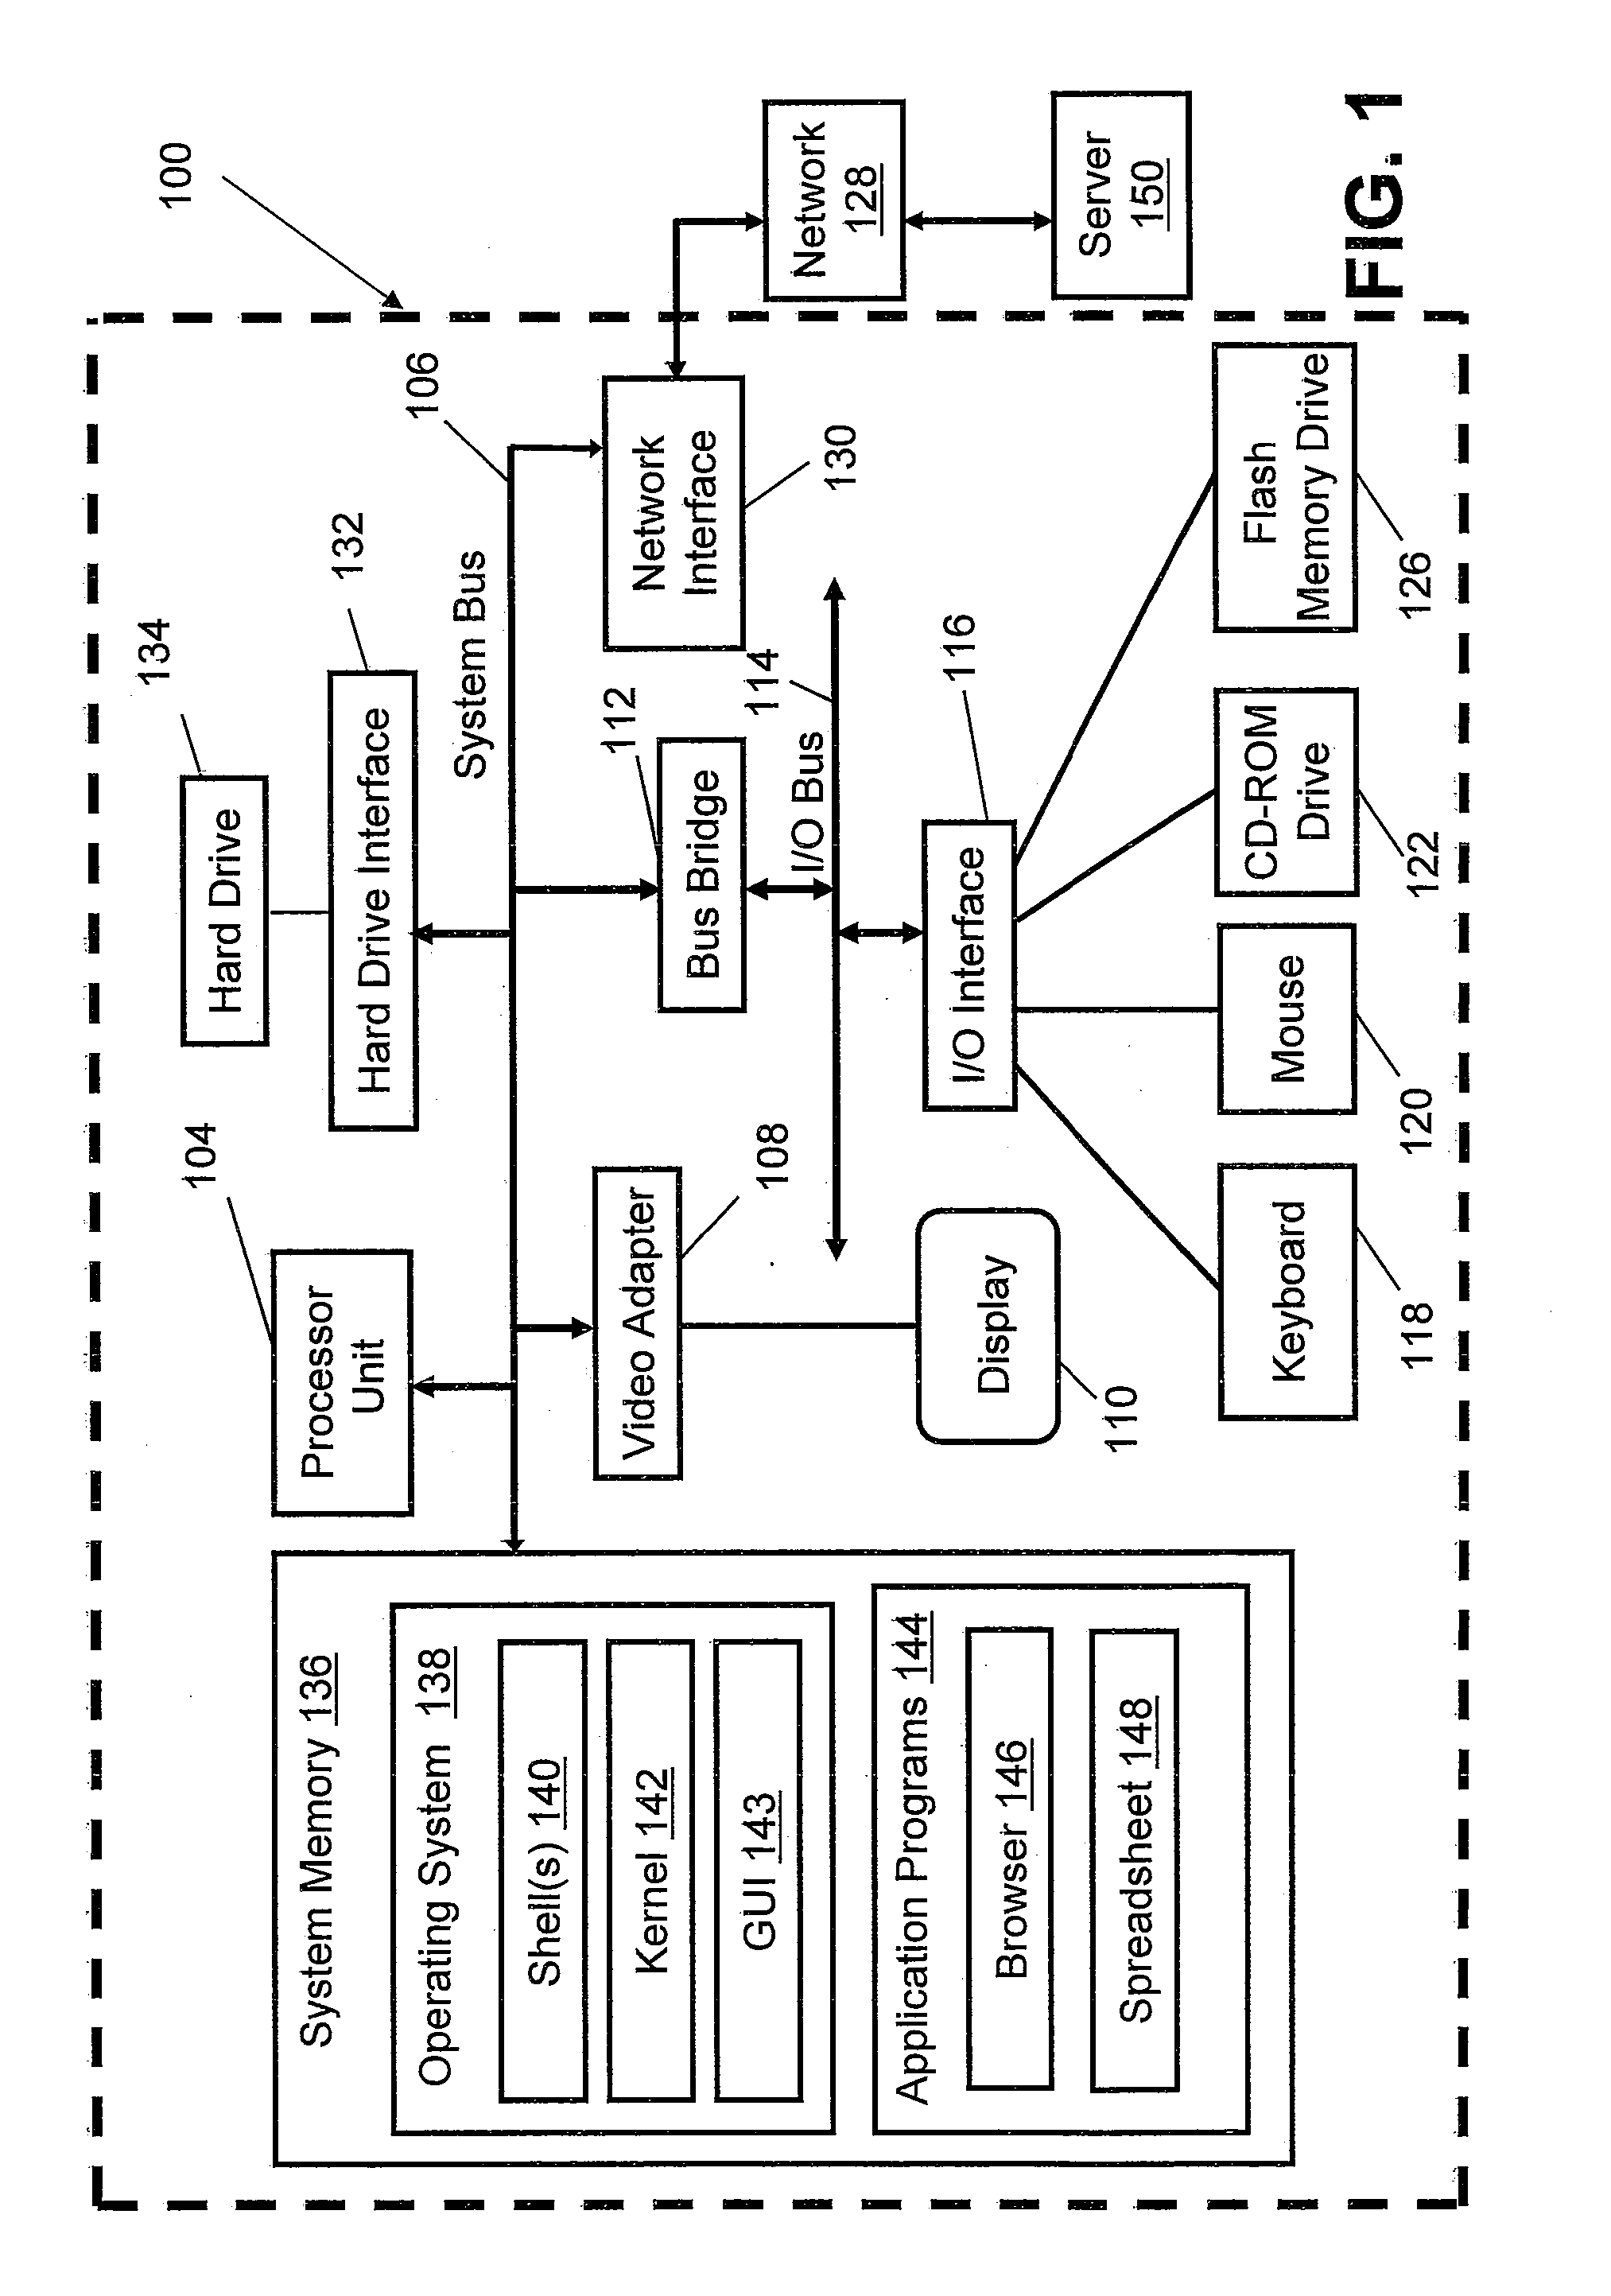 Method and System for Efficiently Adjusting a Timeline in a Time Window